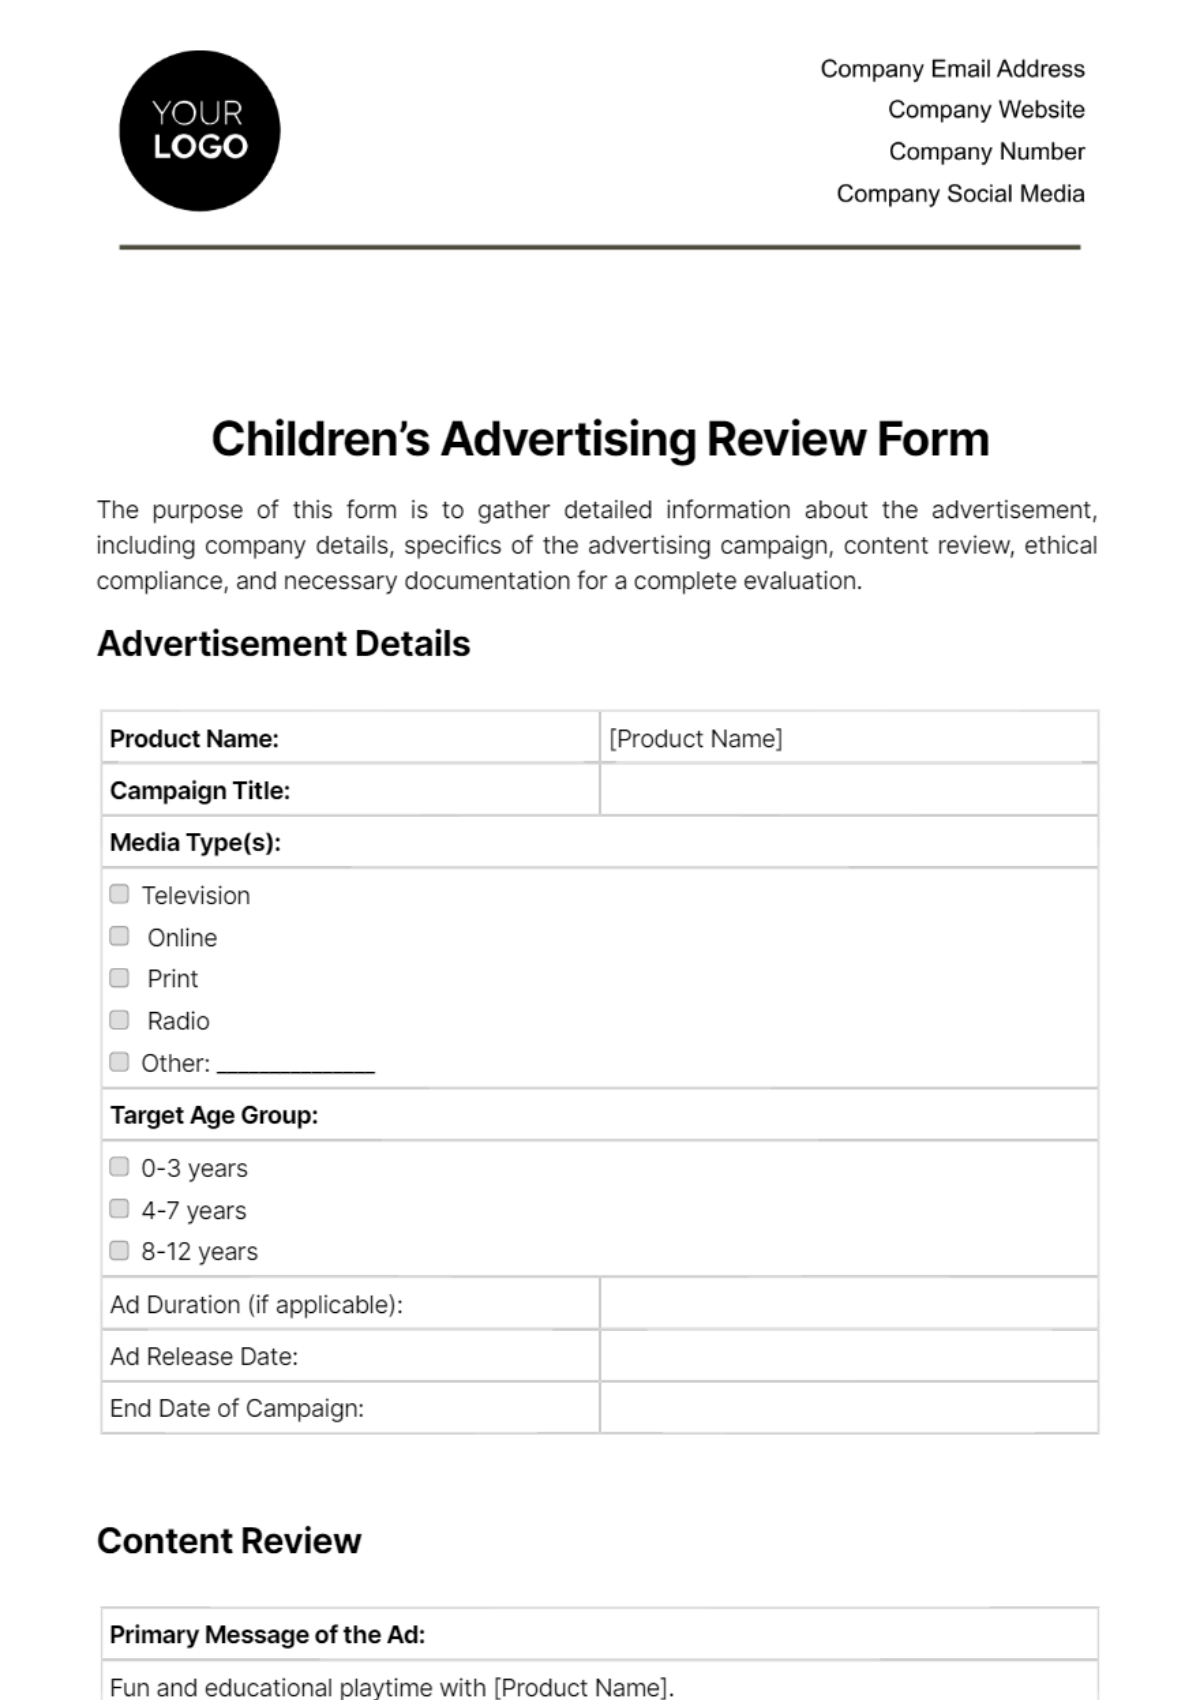 Free Children’s Advertising Review Form Template